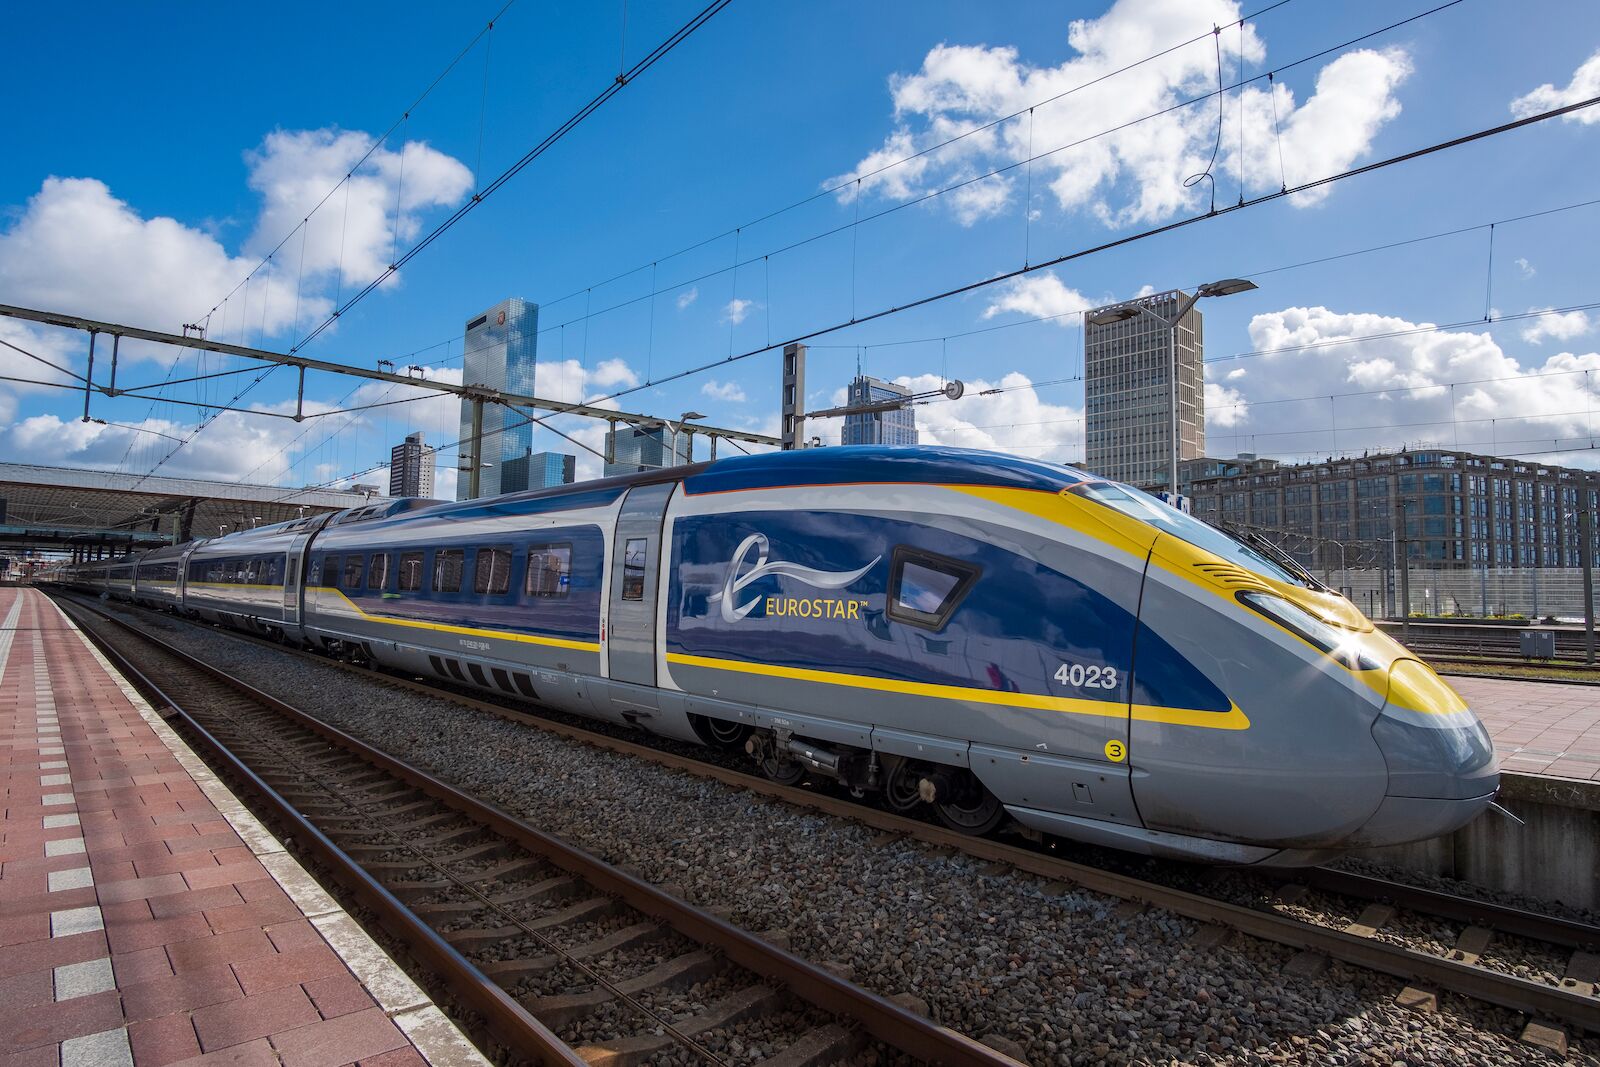 The Eurostar is a train that takes passengers from London to Amsterdam directly, among other destinations